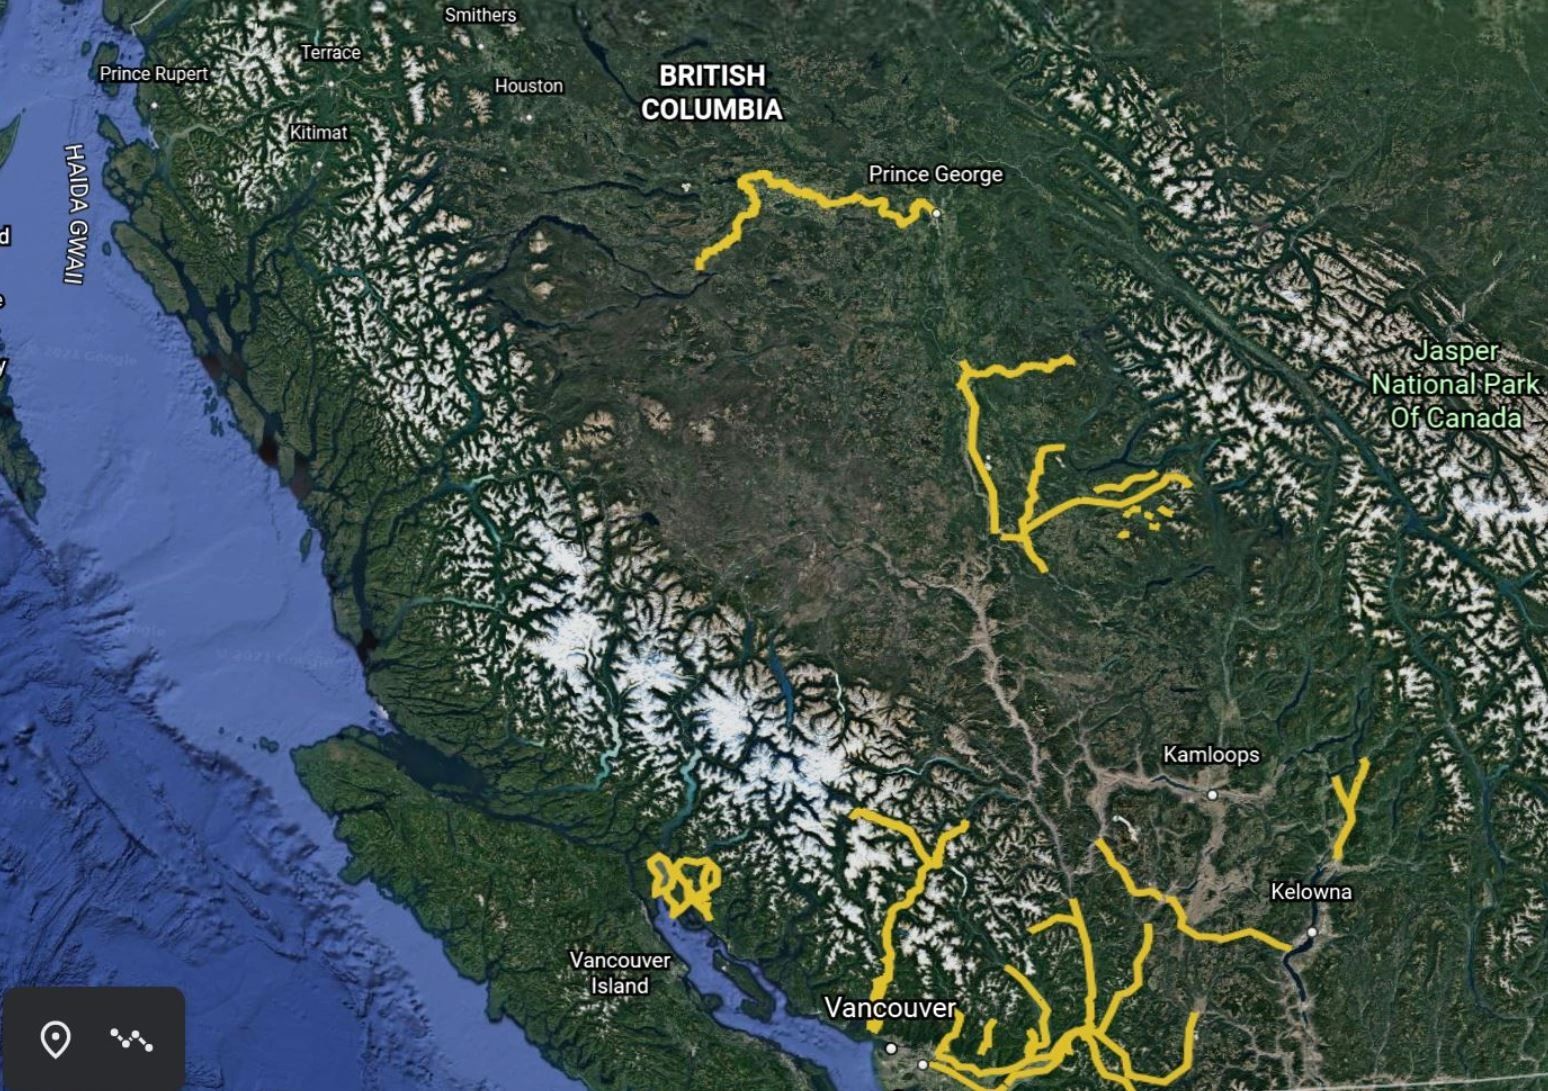 RDI has conducted Visual Landscape Inventory throughout British Columbia as shown on the map.